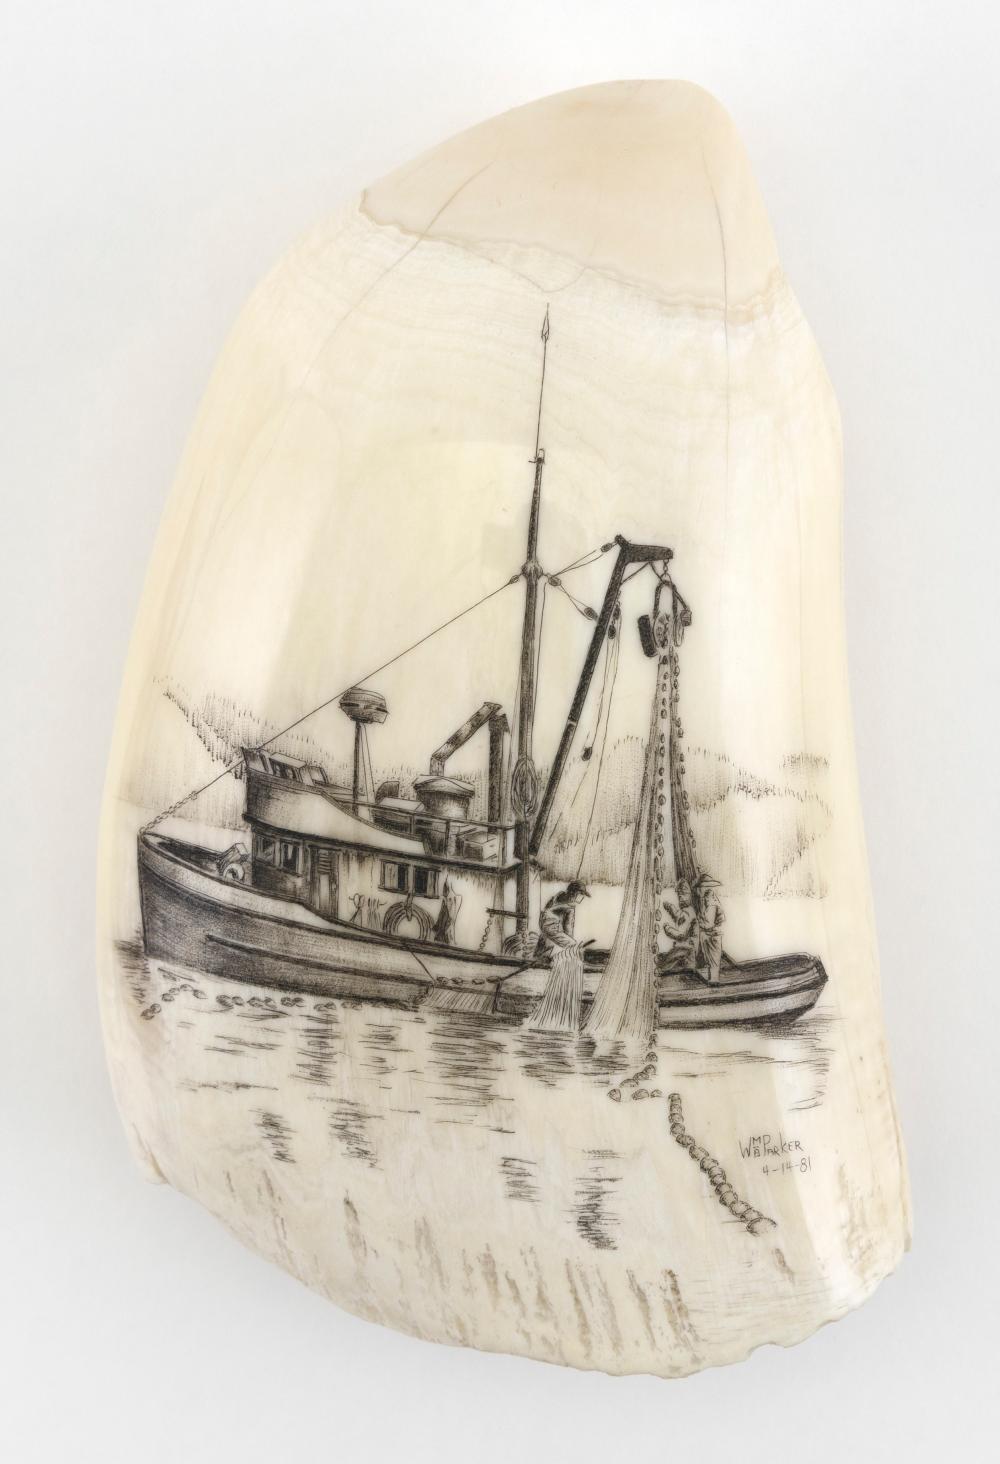  ENGRAVED WHALE S TOOTH DEPICTING 34ca20